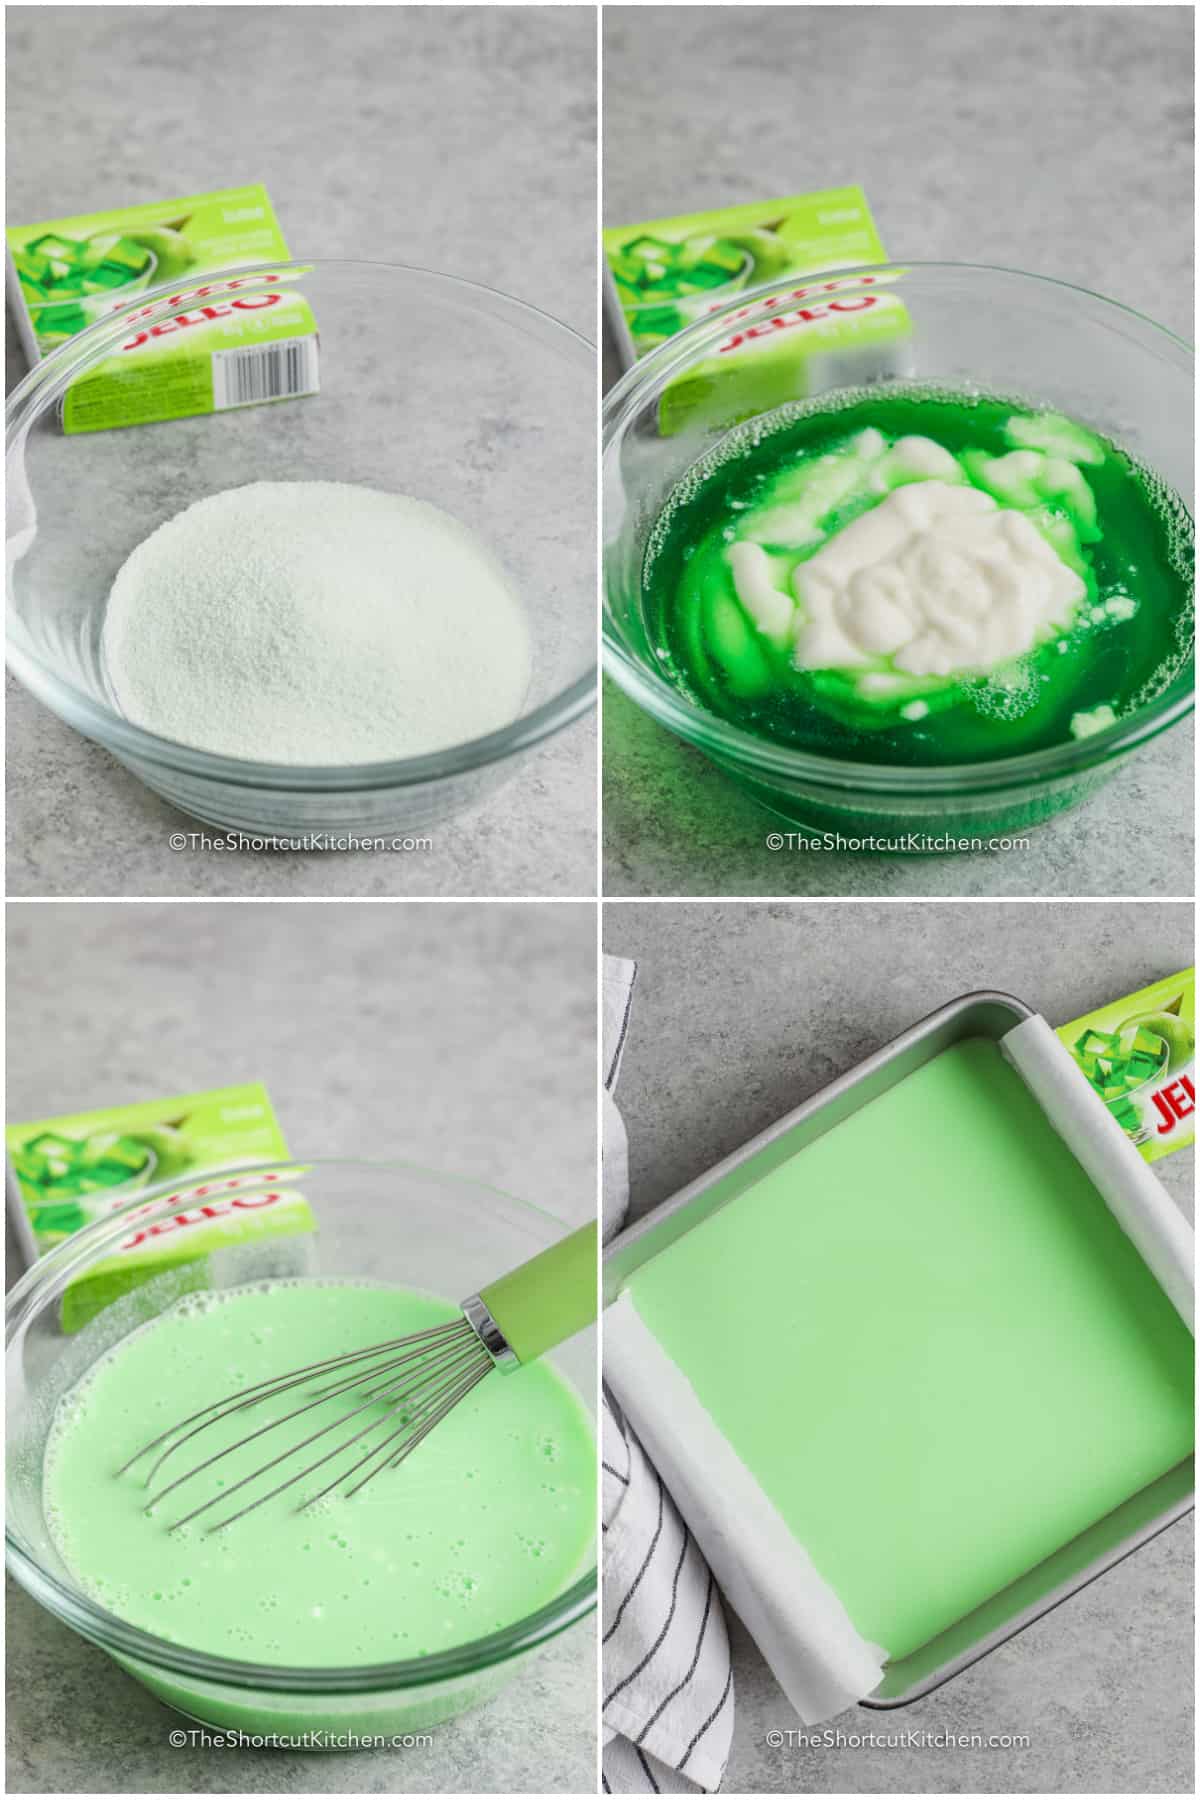 Four images showing the steps to prepare the jello mixture